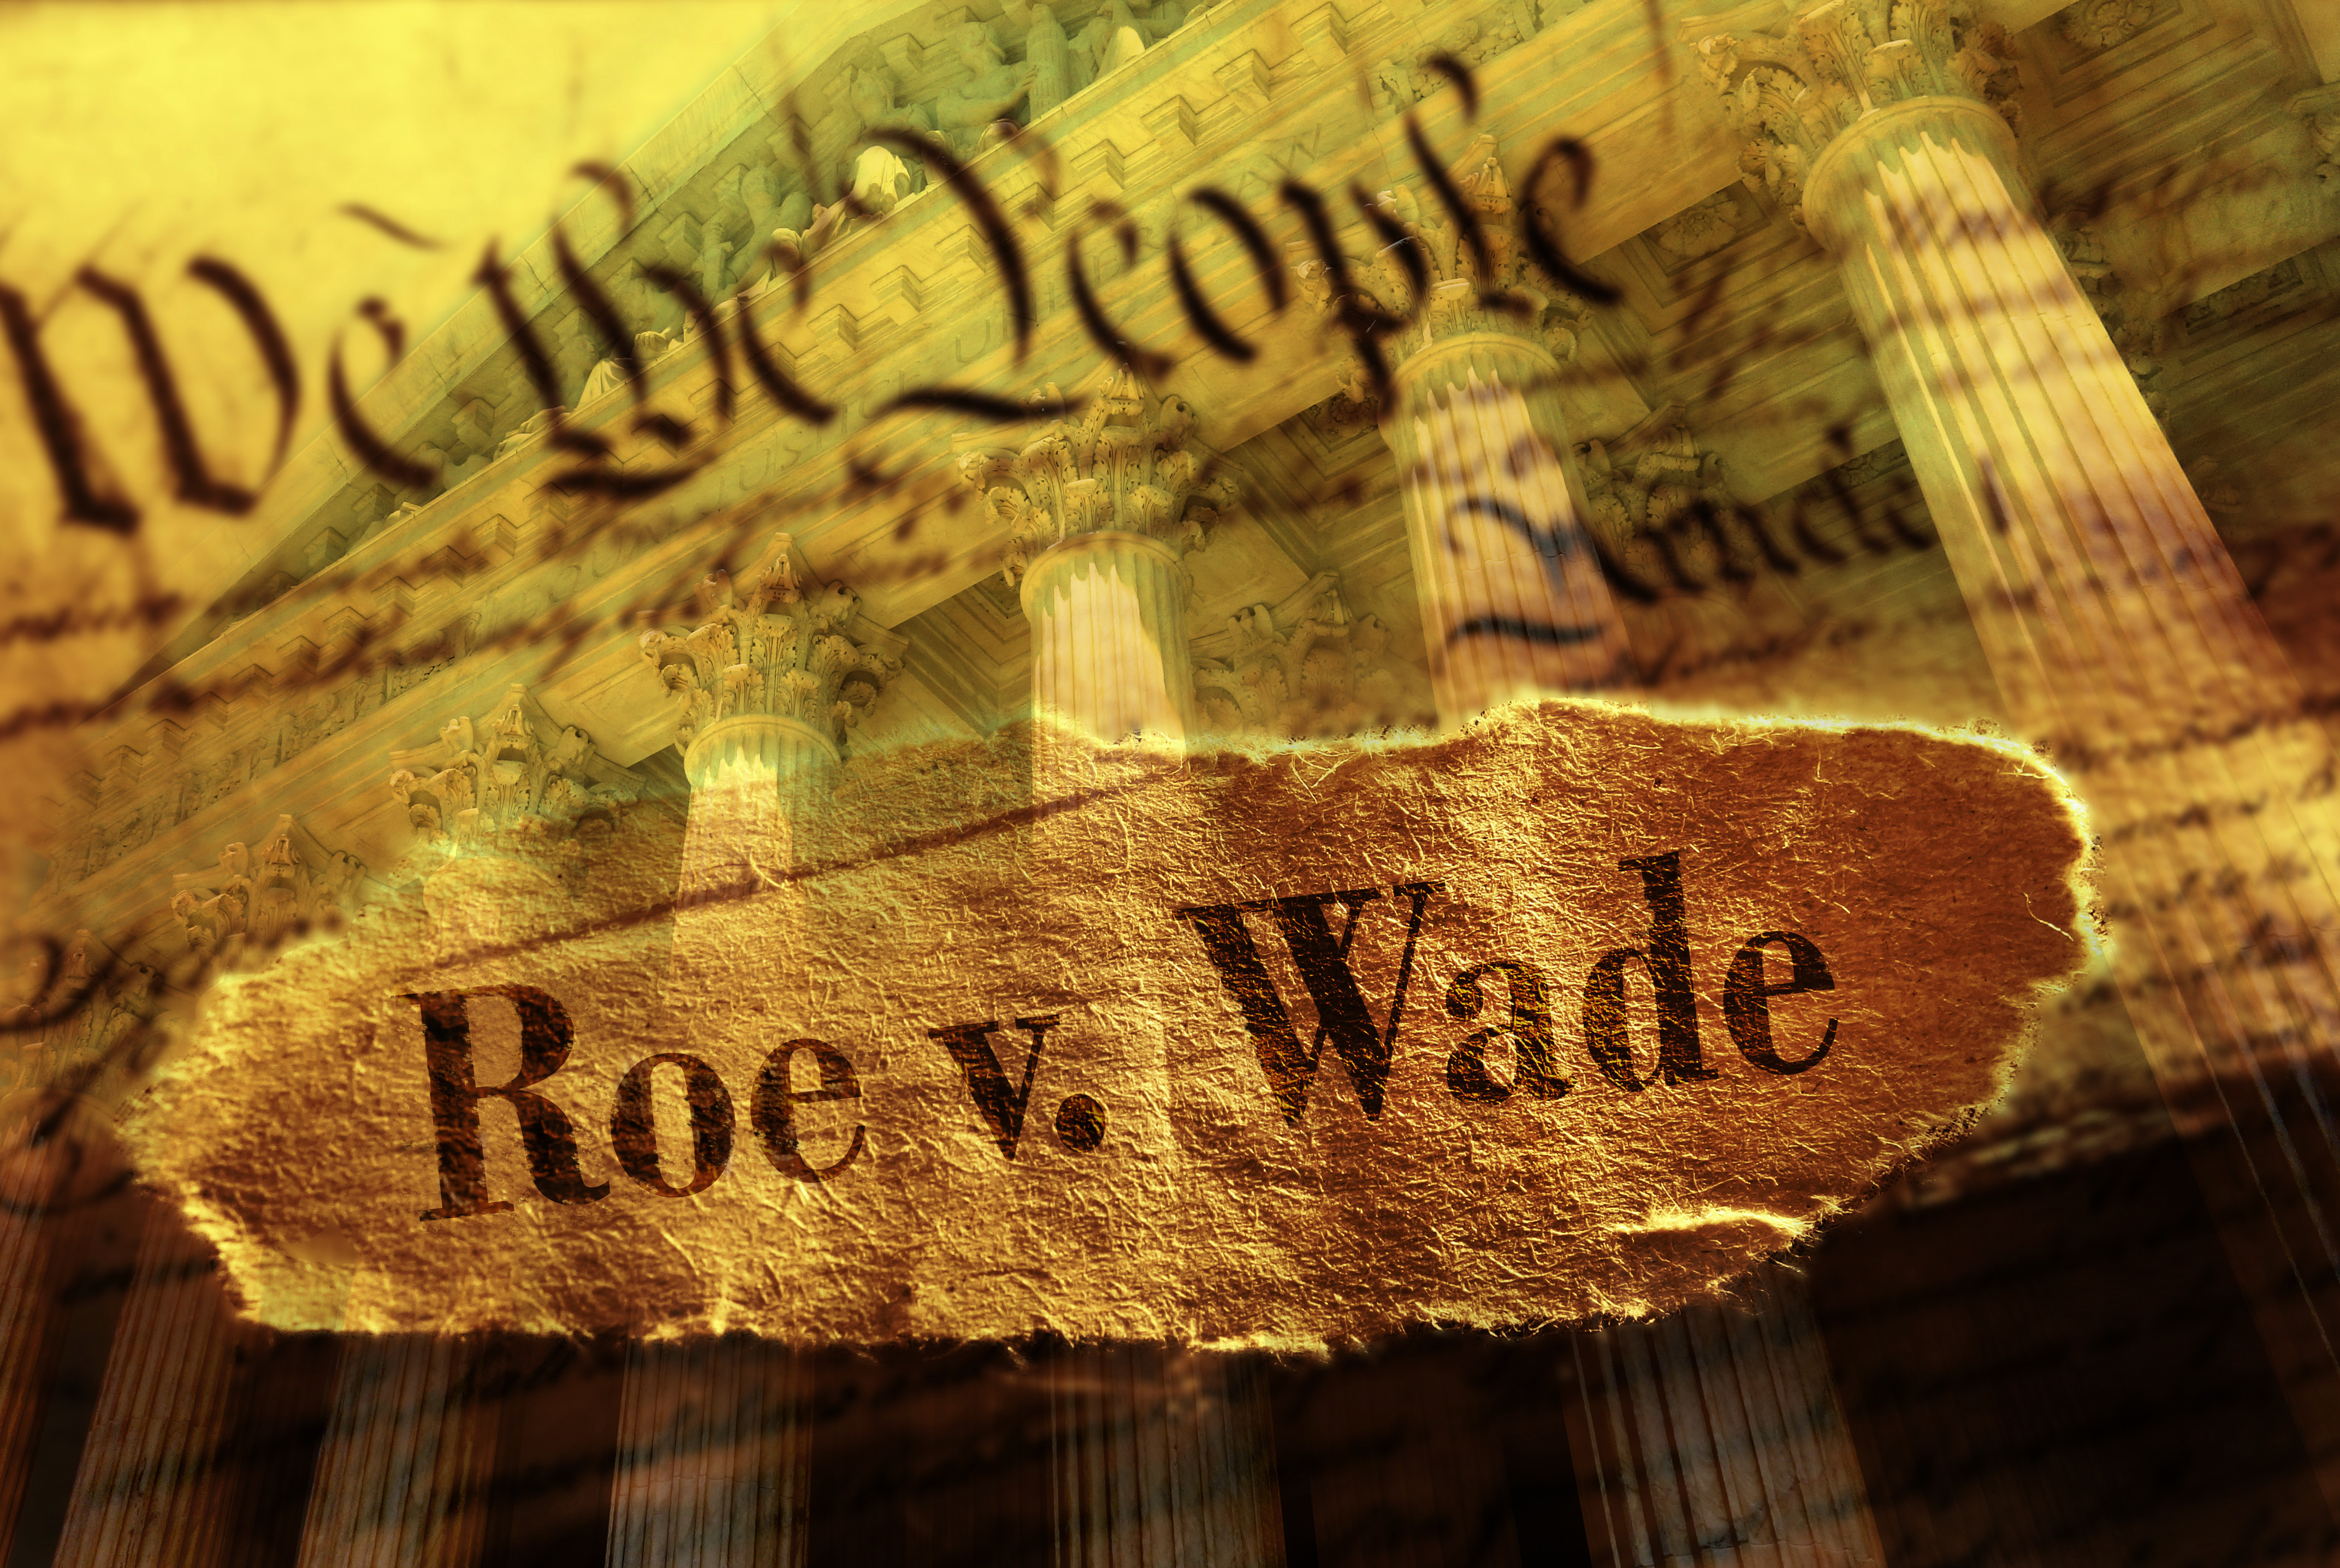 Image of the US Constitution Preamble, "We the People", overlaid with the text "Roe v. Wade"